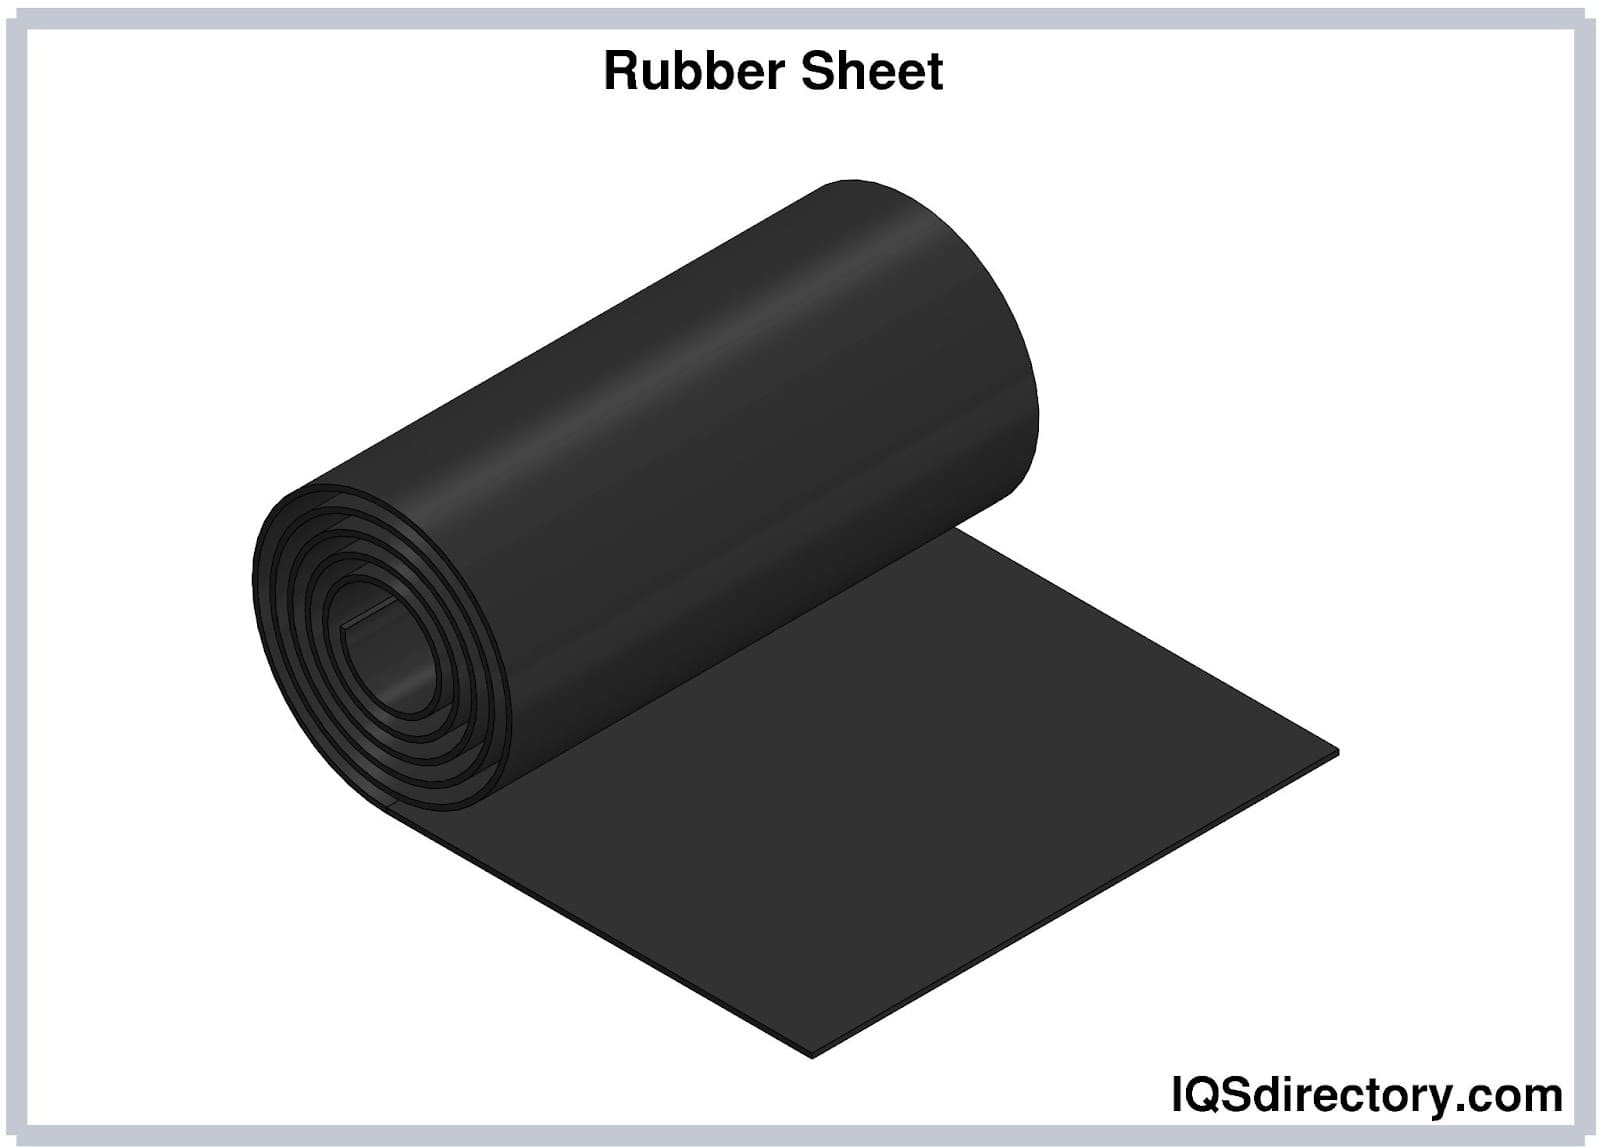 A Guide to High-Temperature Resistant Rubber Materials